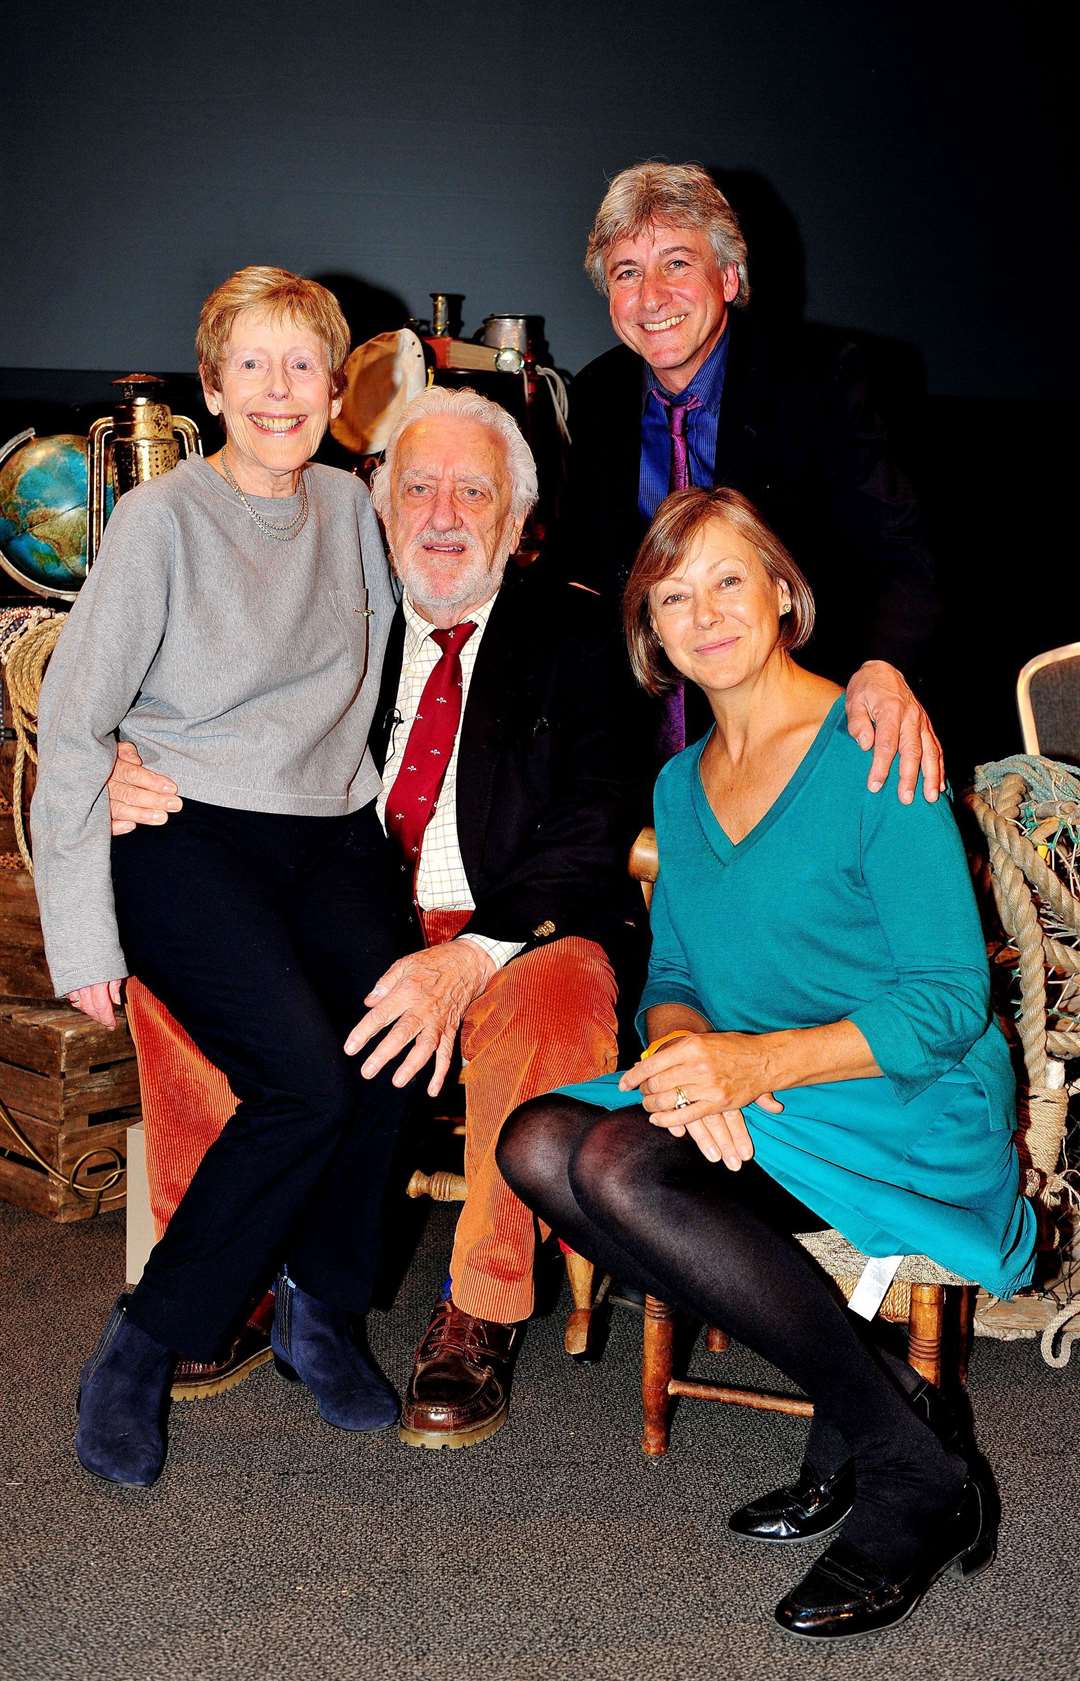 Bernard Cribbins (centre), with fellow cast members of The Railway Children (left to right) Deddie Davies, Gary Warren and Jenny Agutter, after he received the J M Barrie Award for a lifetime of unforgettable work for children on stage, film, television and record (Nicholas T Ansell/PA)